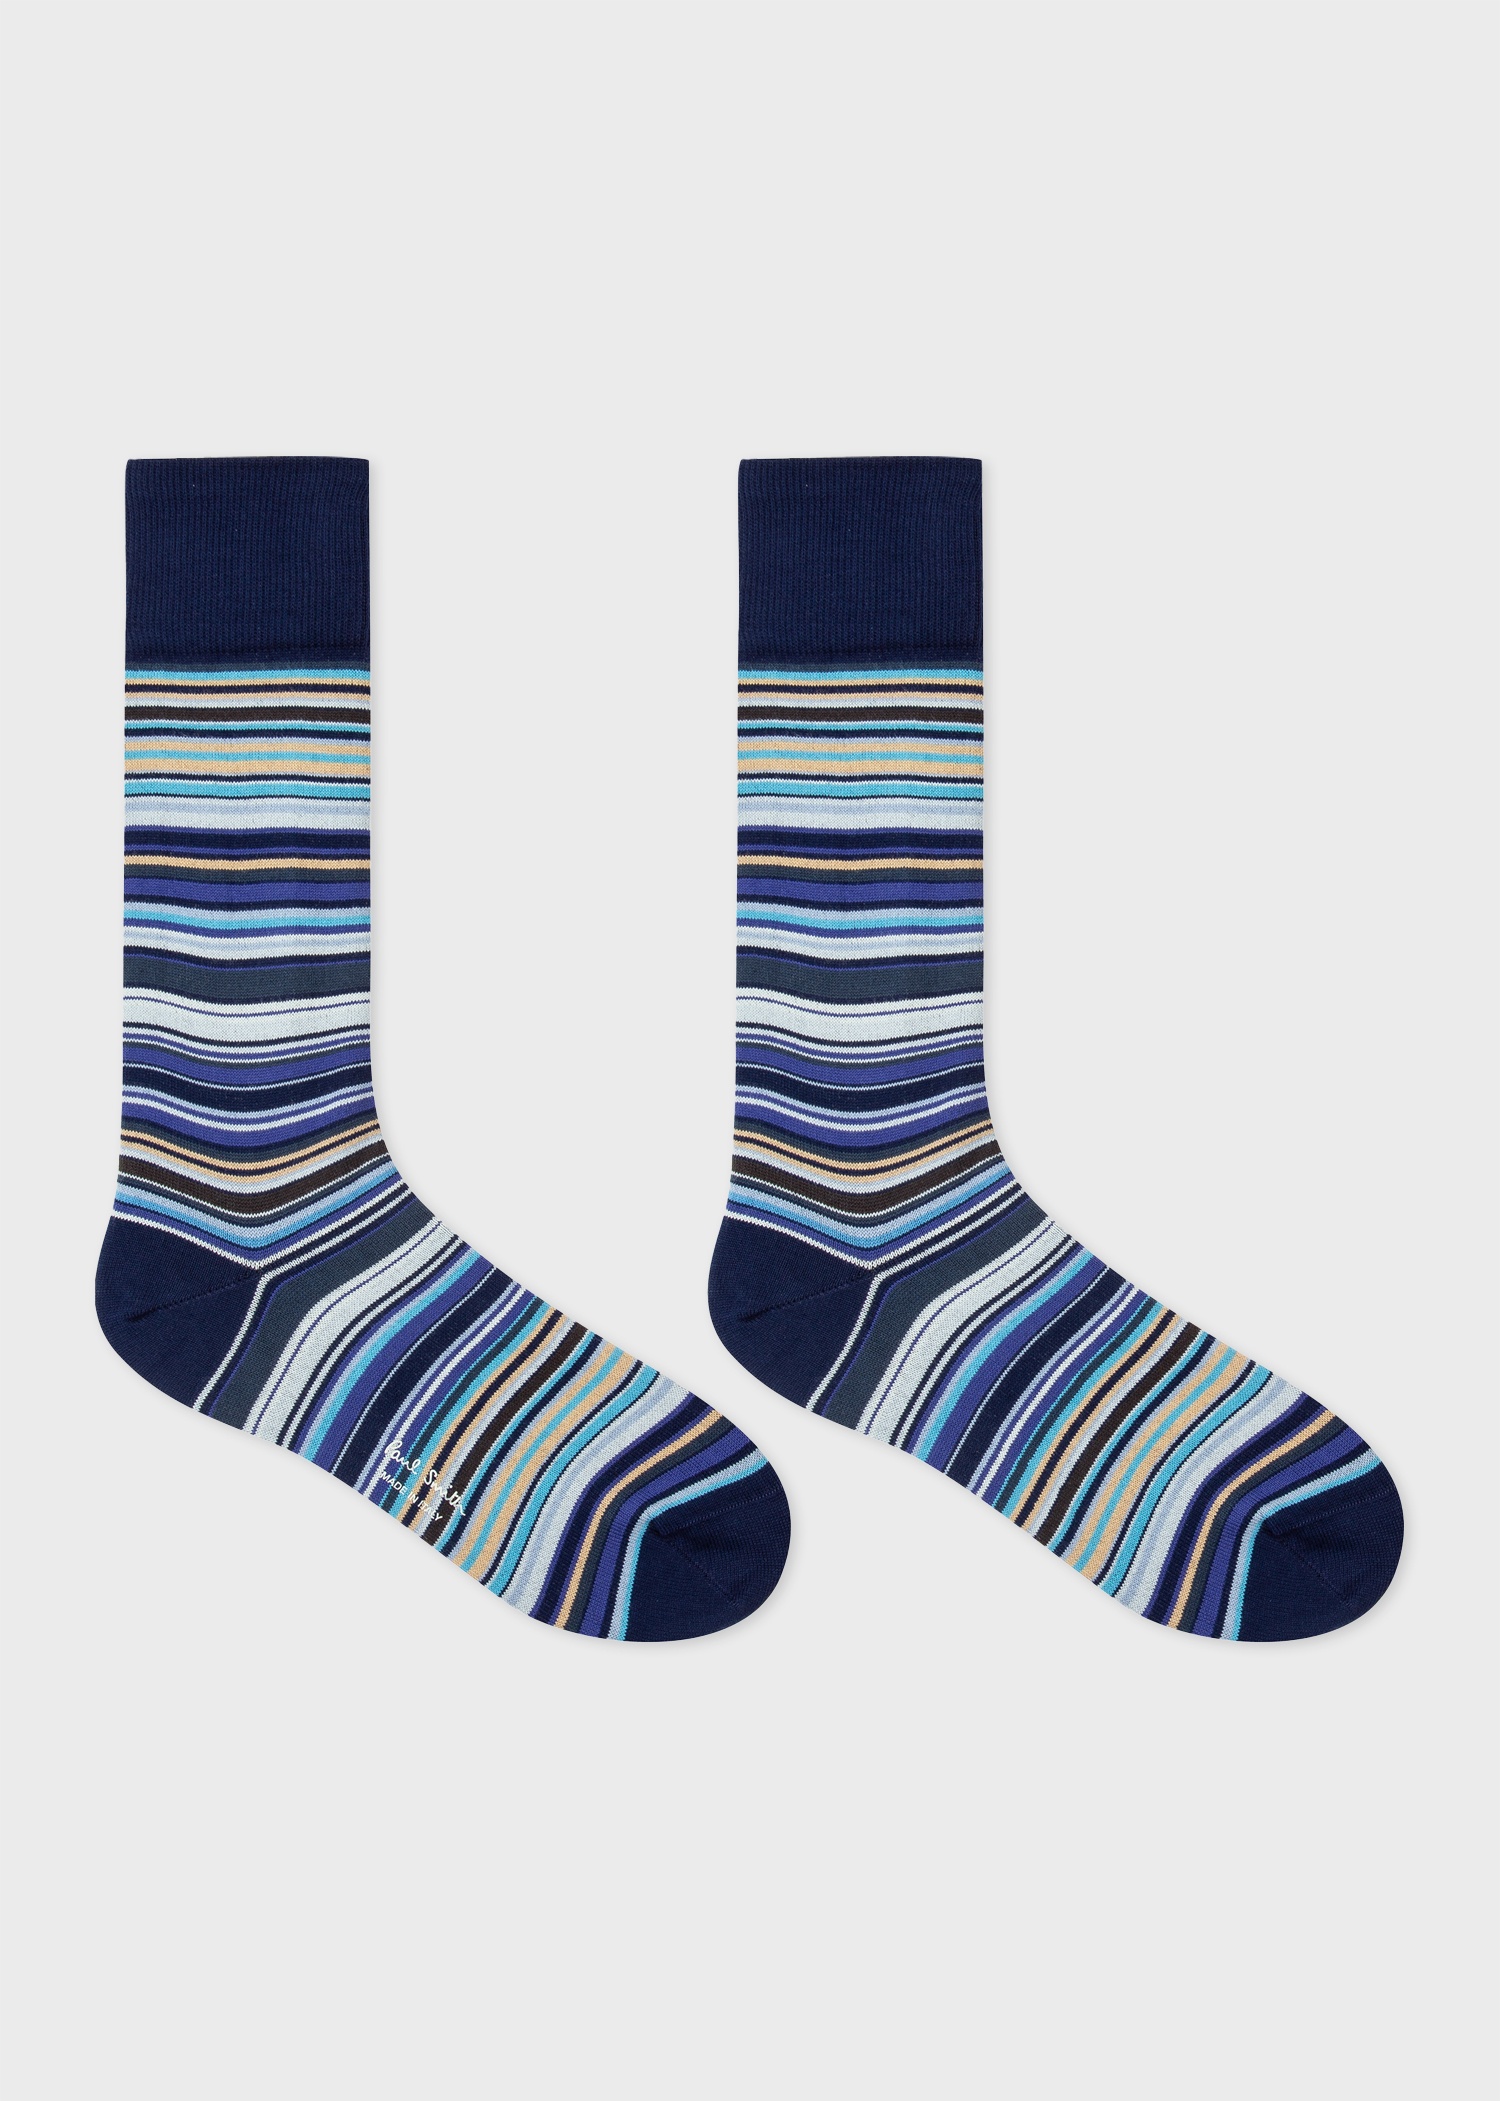 Navy And Grey 'Signature Stripe' Socks Two Pack - 2